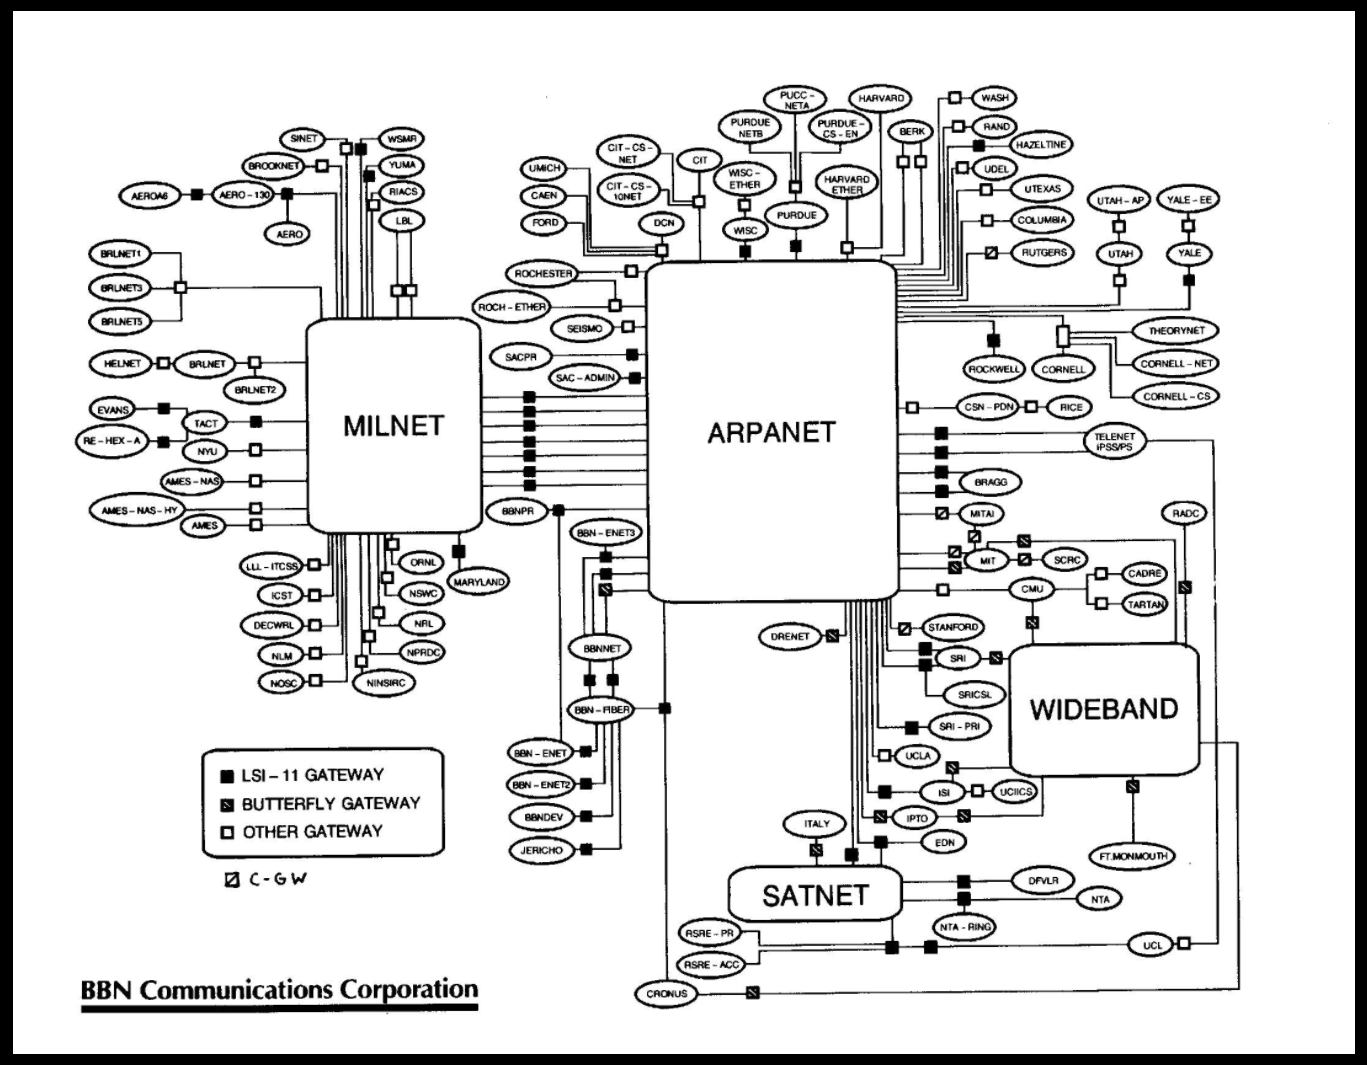 Map of MILNET, ARPANET, SATNET, and WIDEBAND by BBN